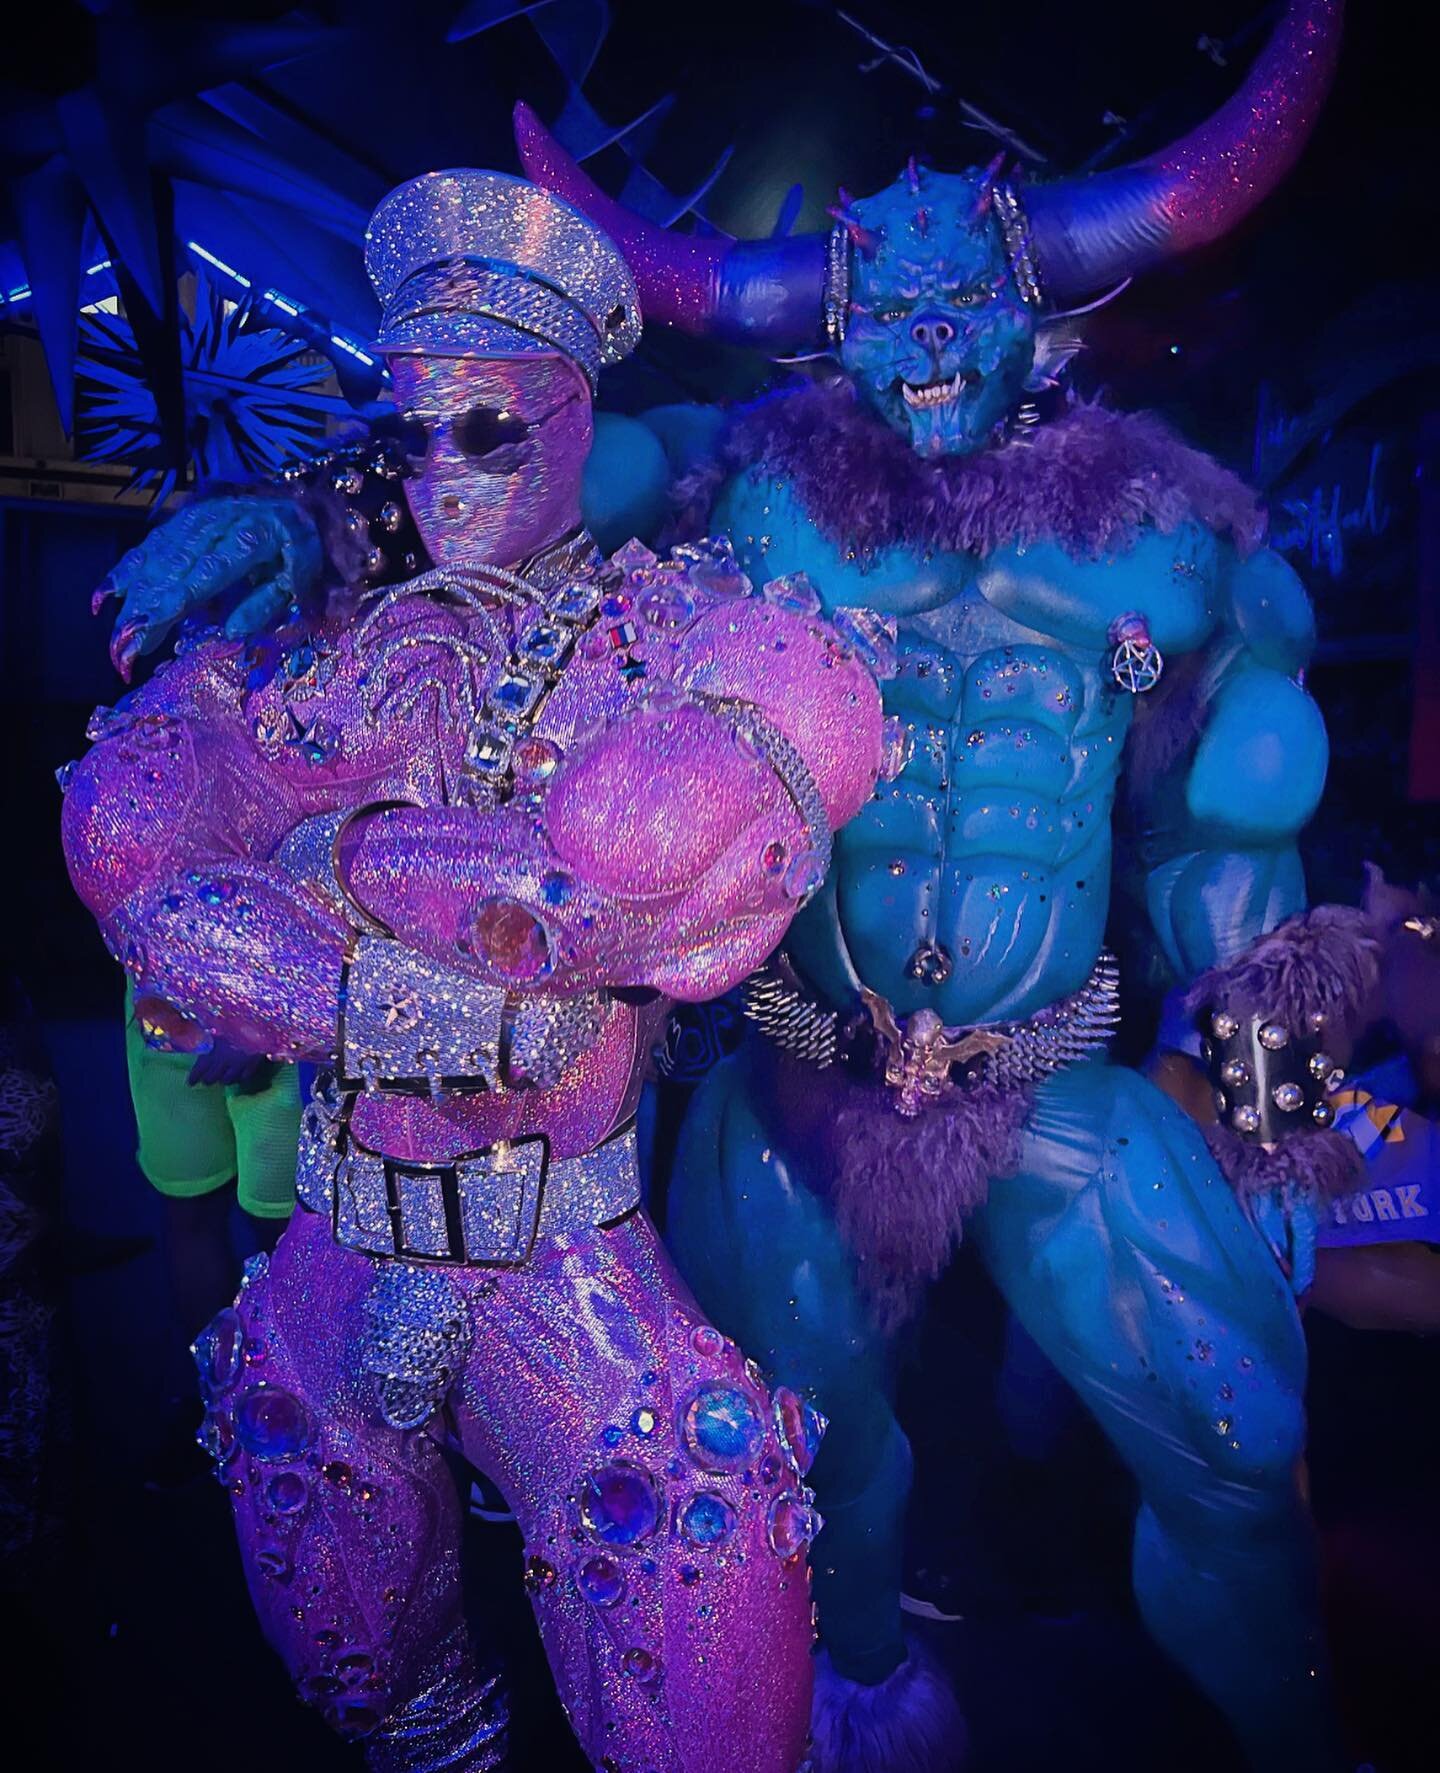 Went out nightclubbing last night. Iman Drago, my bodyguard, is kinda of a c*nt. A fierce c*nt mind you, but still a c*nt. Don&rsquo;t try it with him, he&rsquo;s not as nice as me.